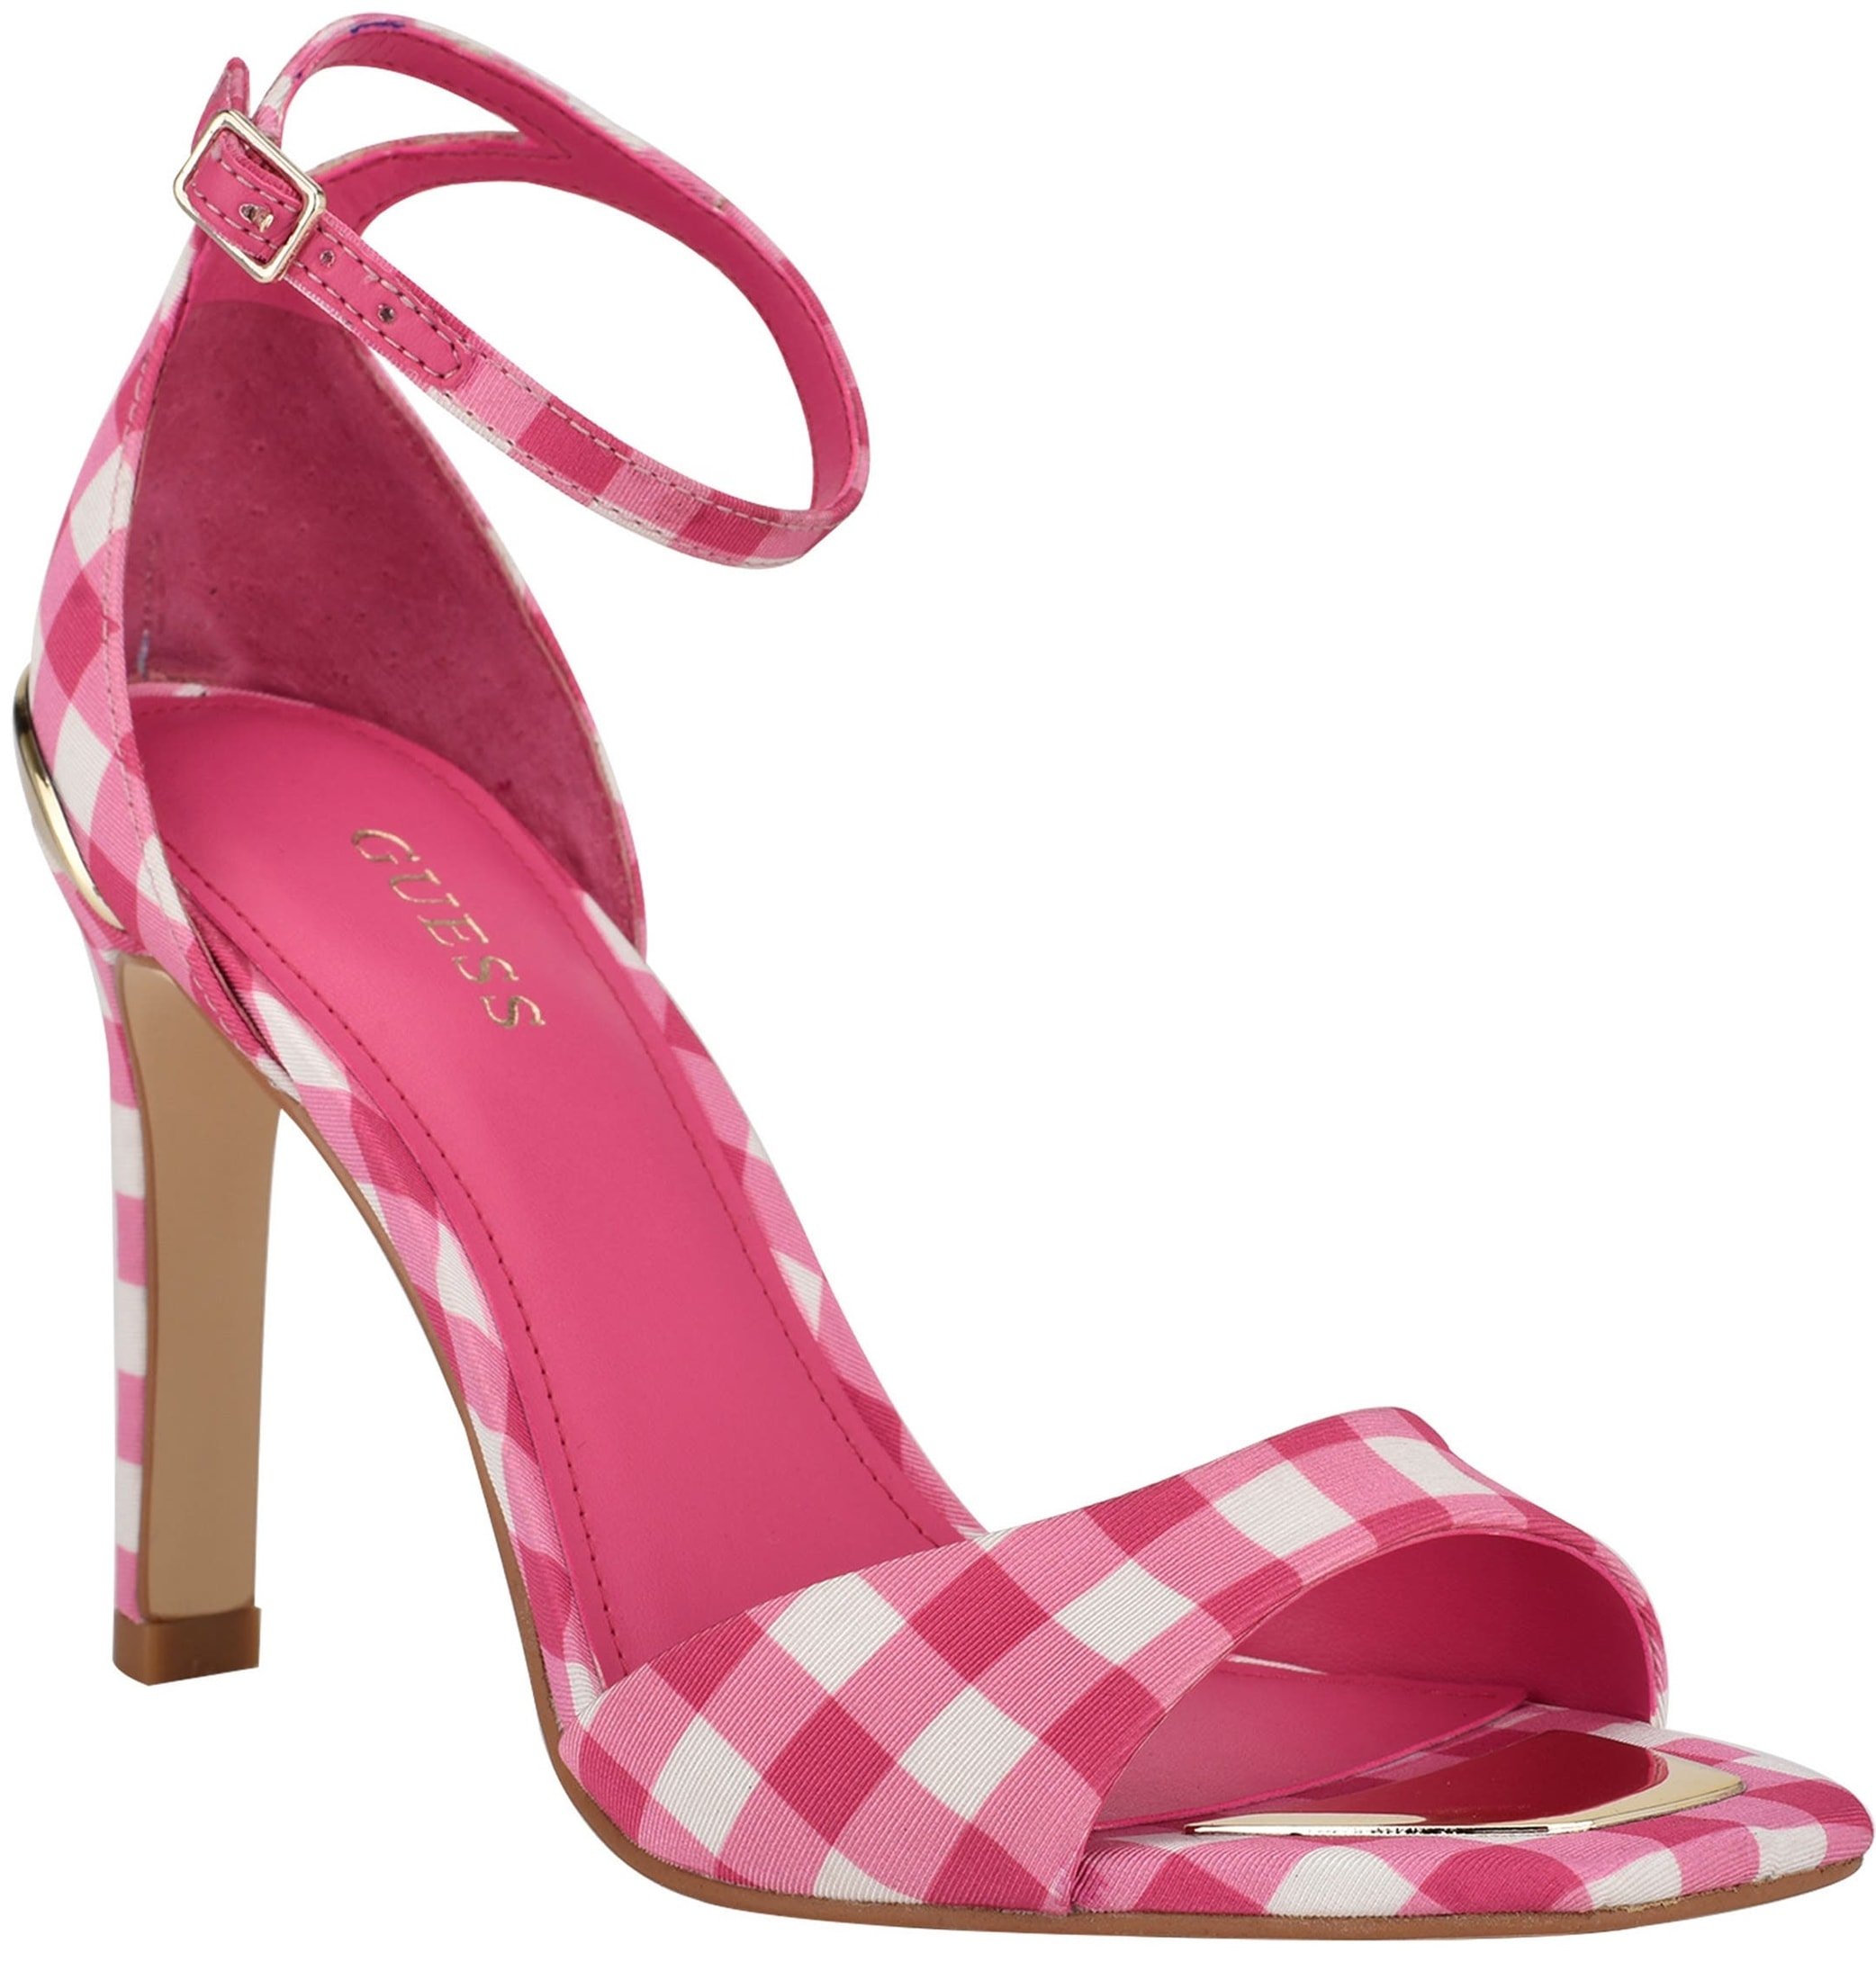 Stroll like a supermodel in this pink gingham dress sandal featuring an appealing logo metal rand and slim covered heel